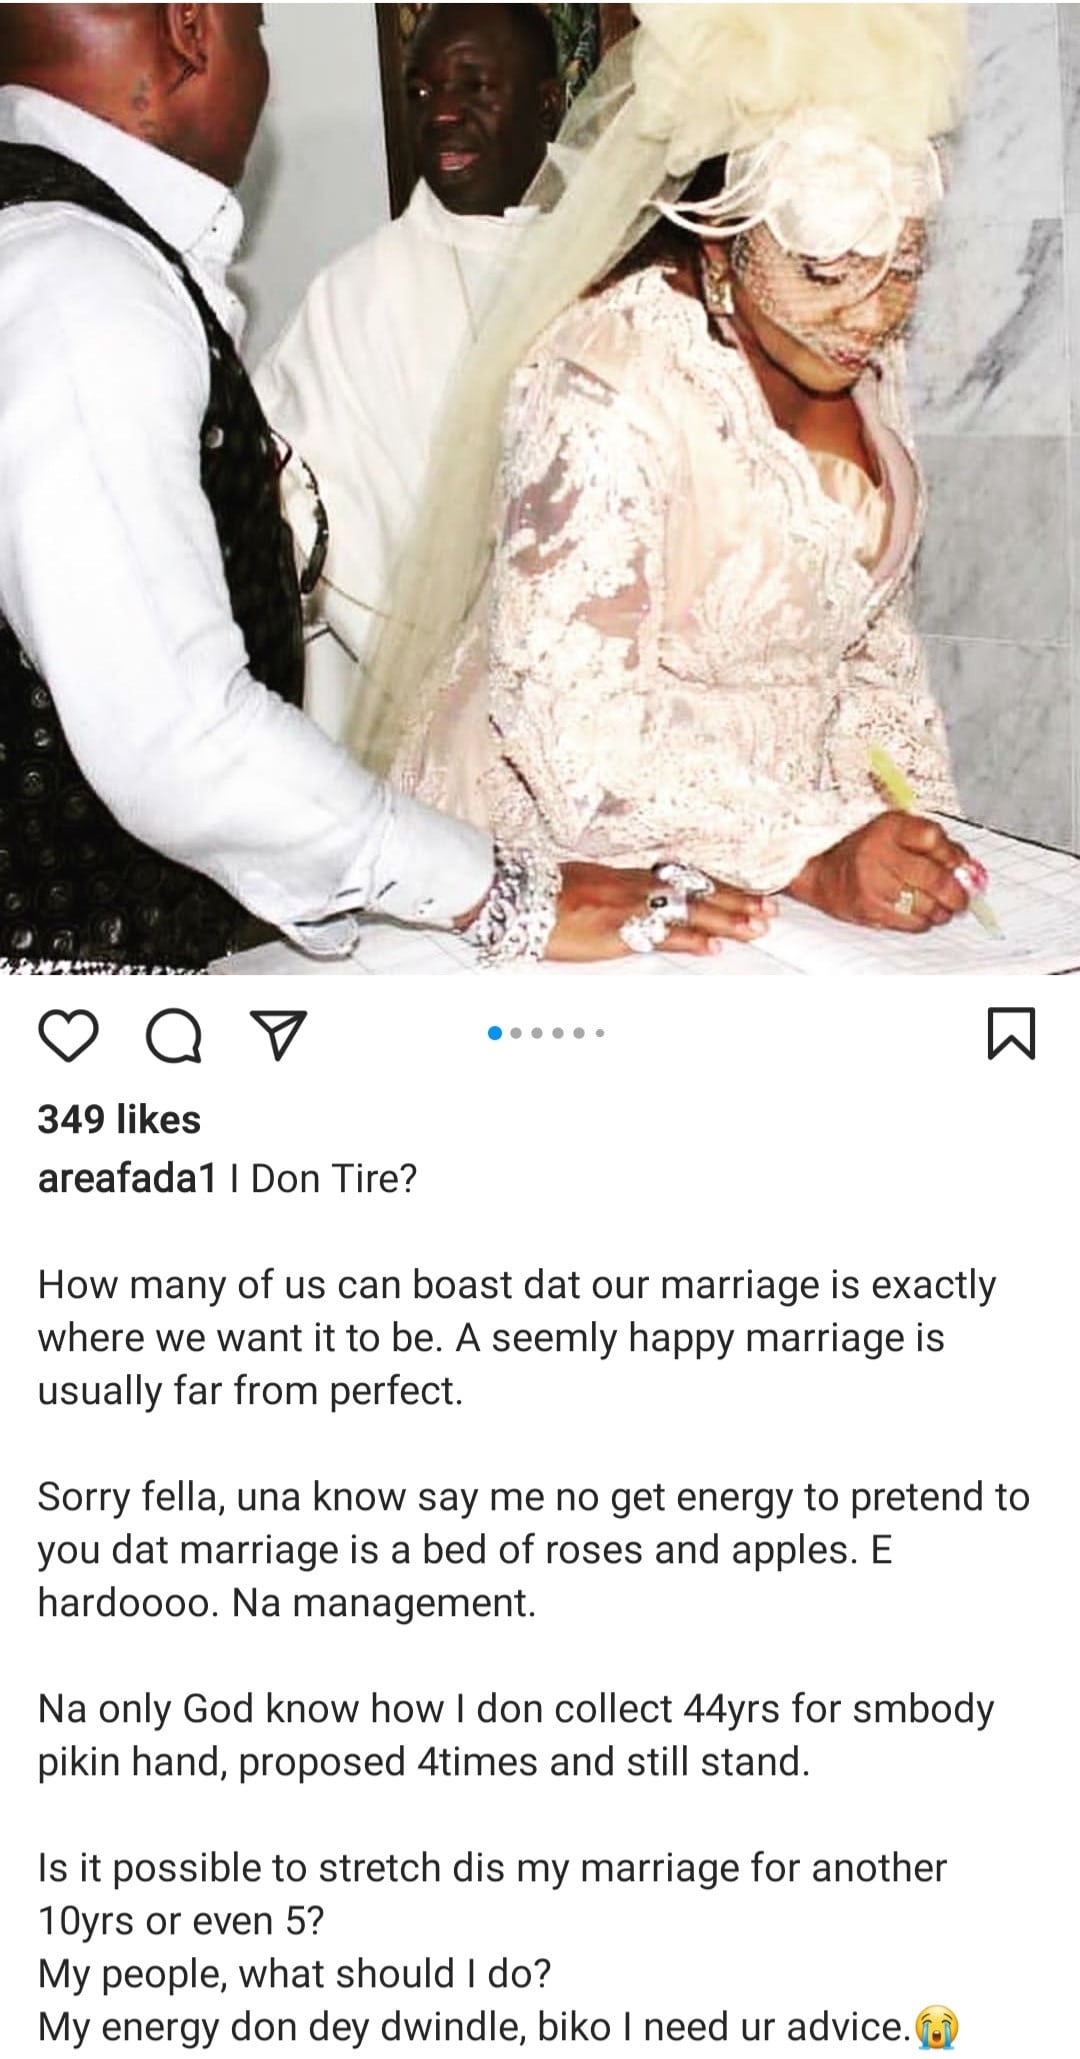 ‘I Need Marital Advice’ – Charly Boy Cries Out For Help After 44 Years In Marriage